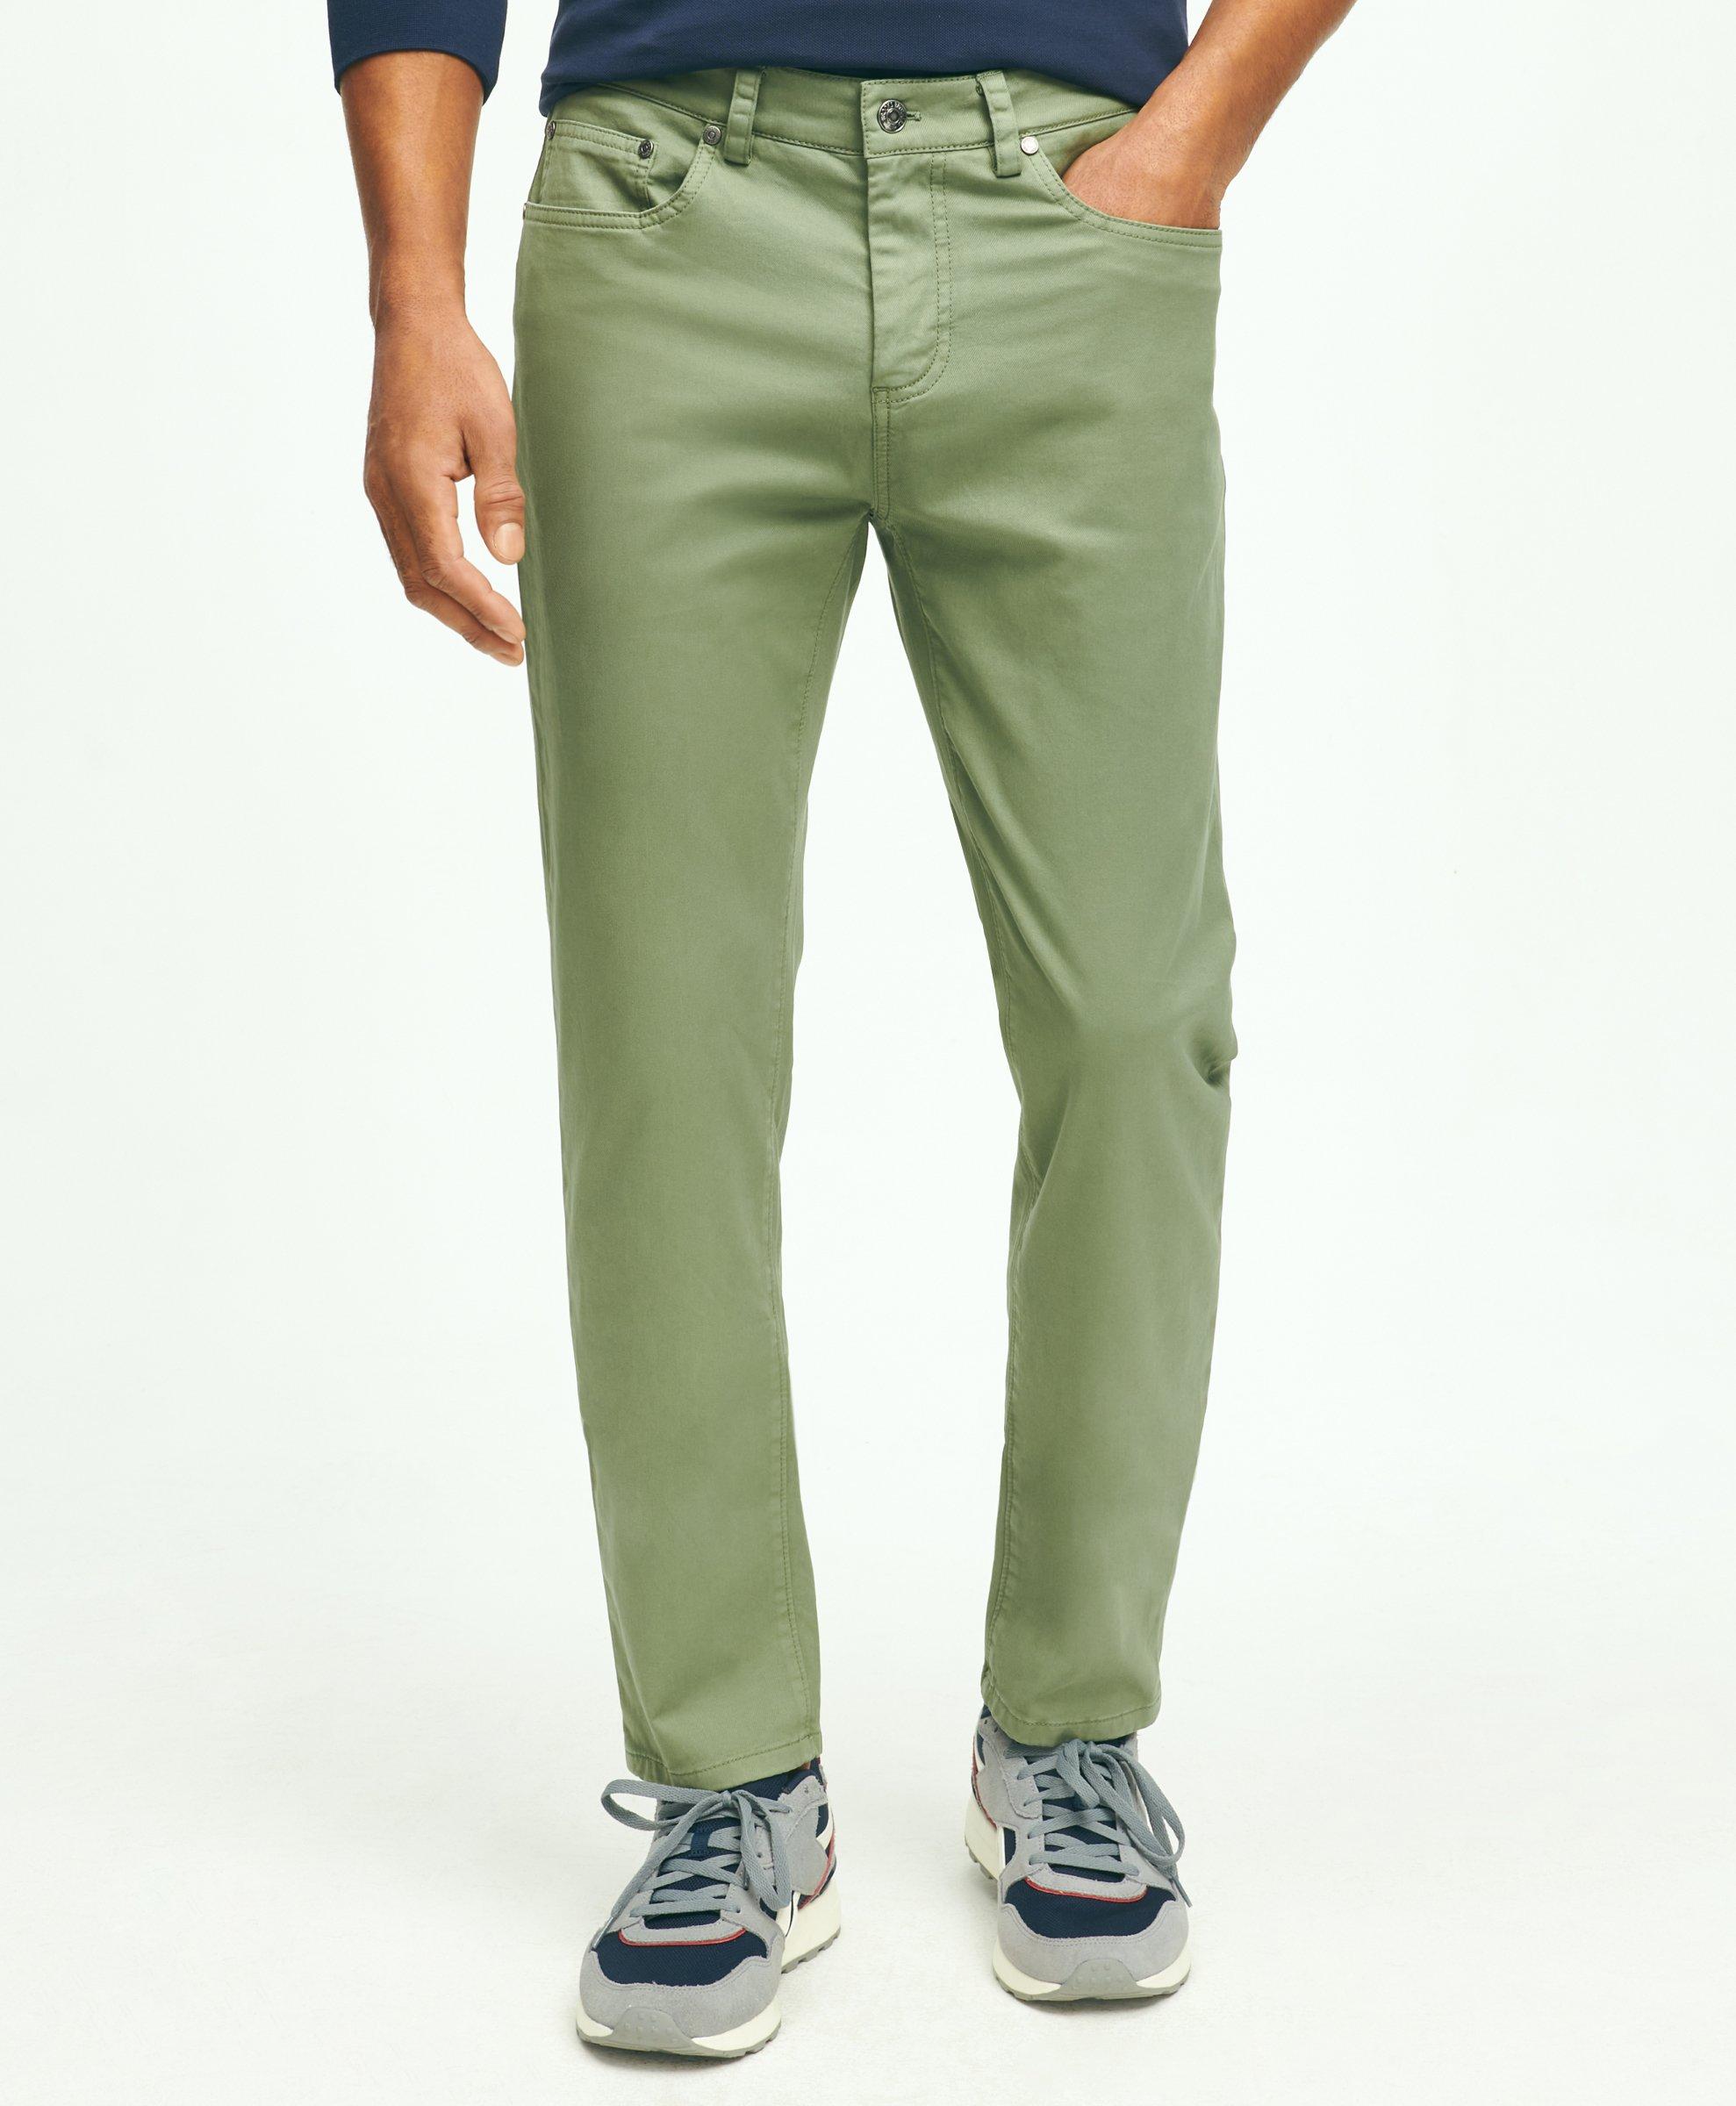 Brooks Brothers Slim Fit Five-pocket Stretch Cotton Garment Dyed Pants | Green | Size 38 30